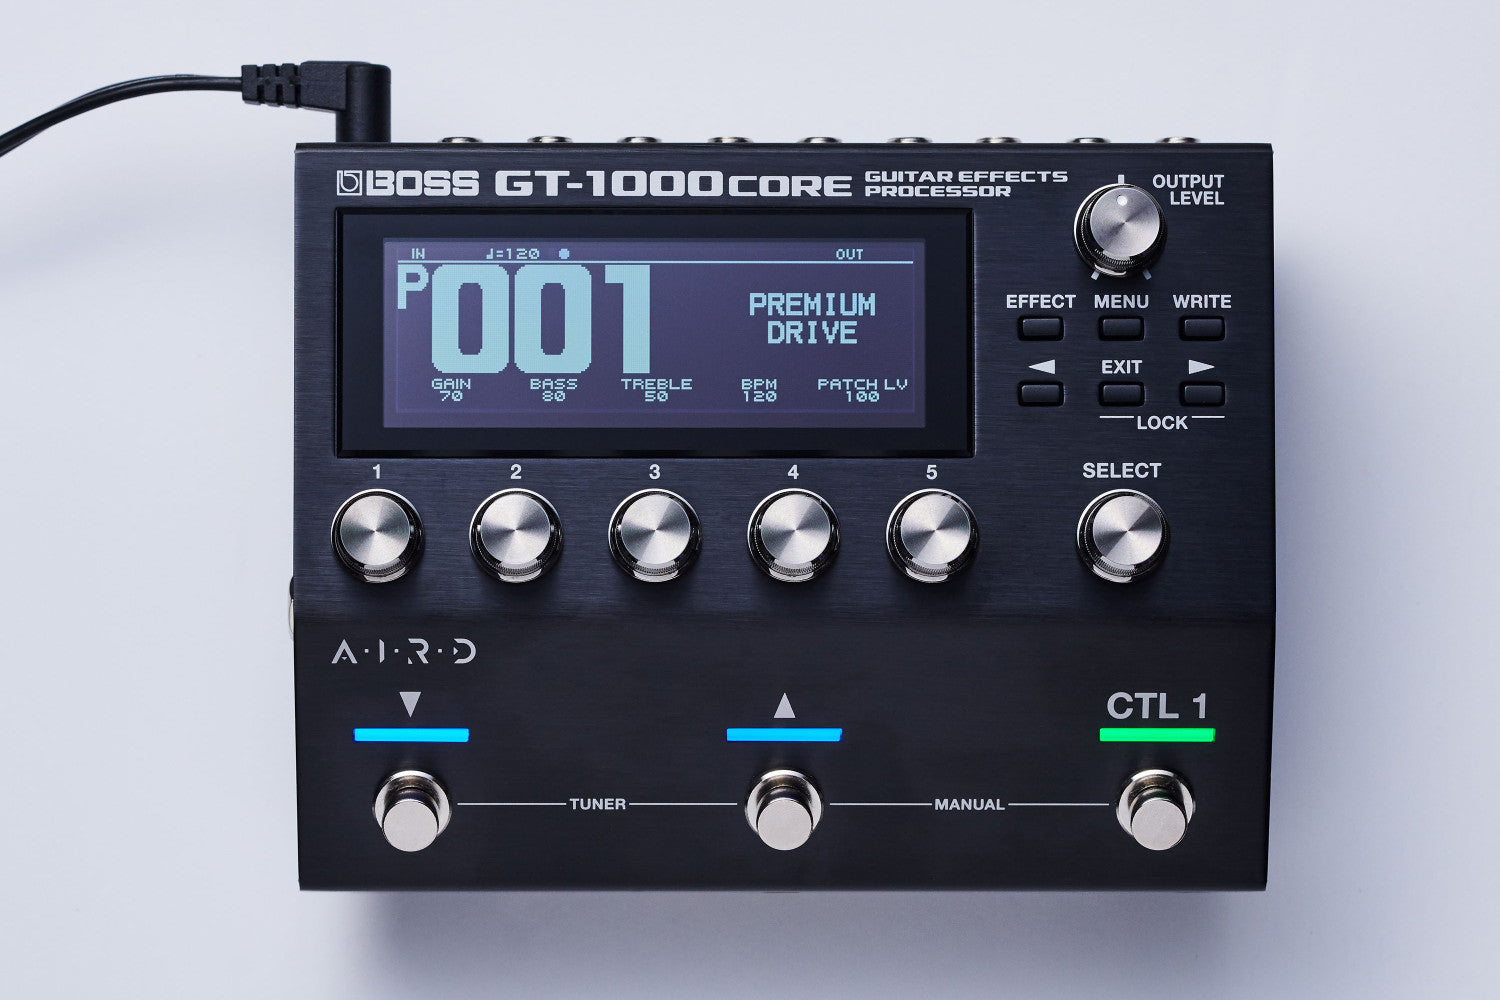 BOSS GT-1000CORE - GT-1000 stomp from Boss, Page 42